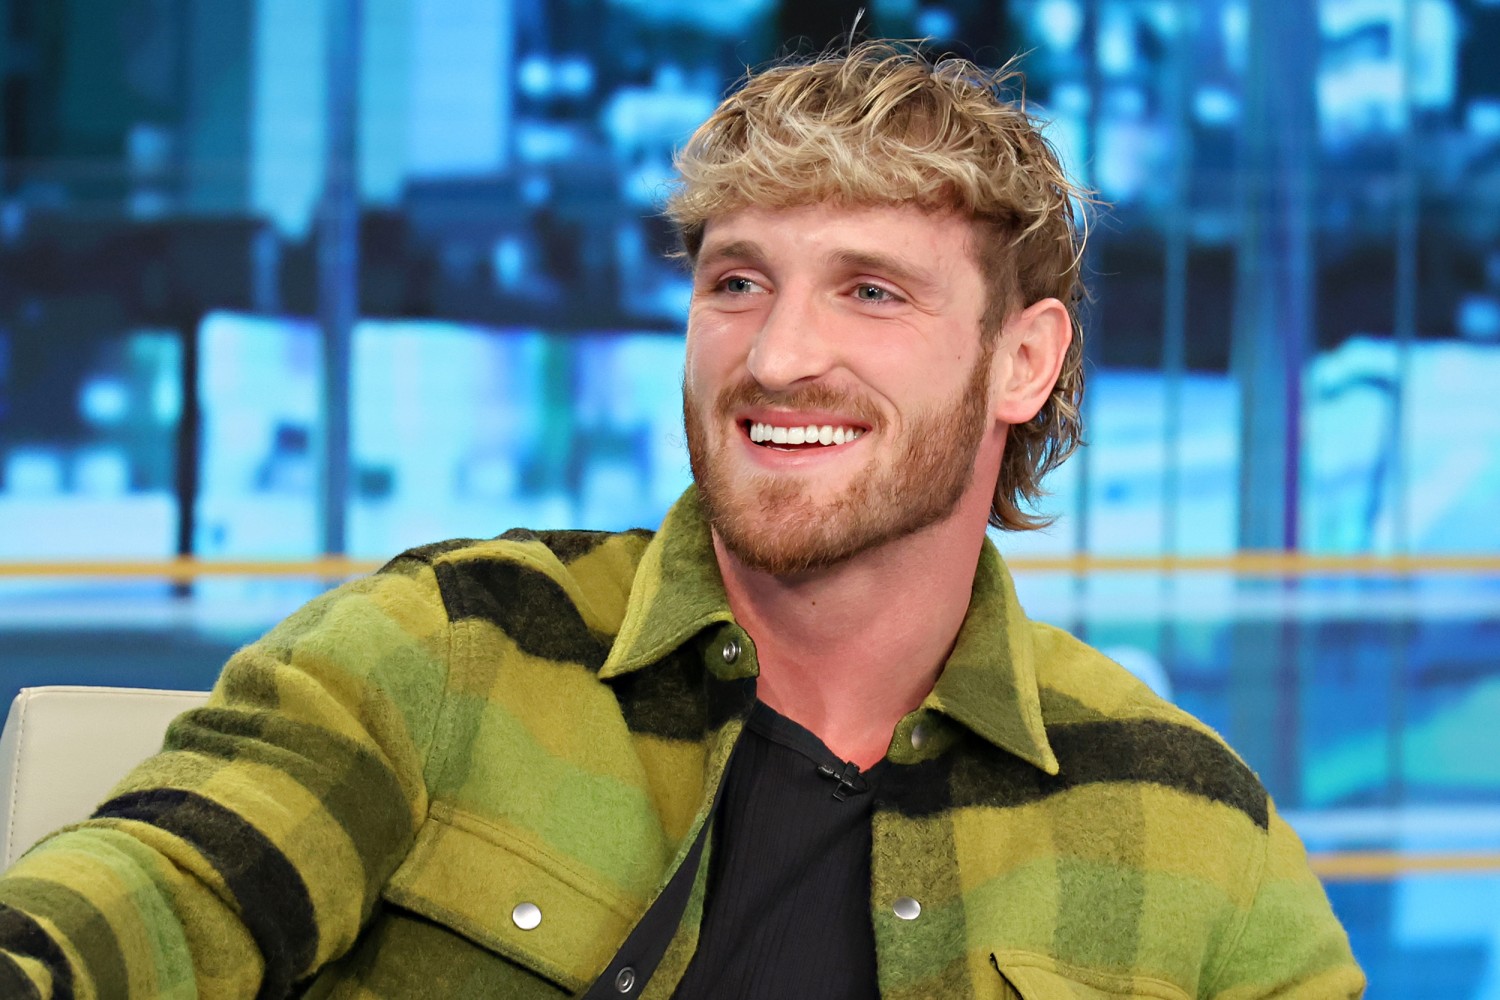 Logan Paul announces he will buy back NFTs from his failed